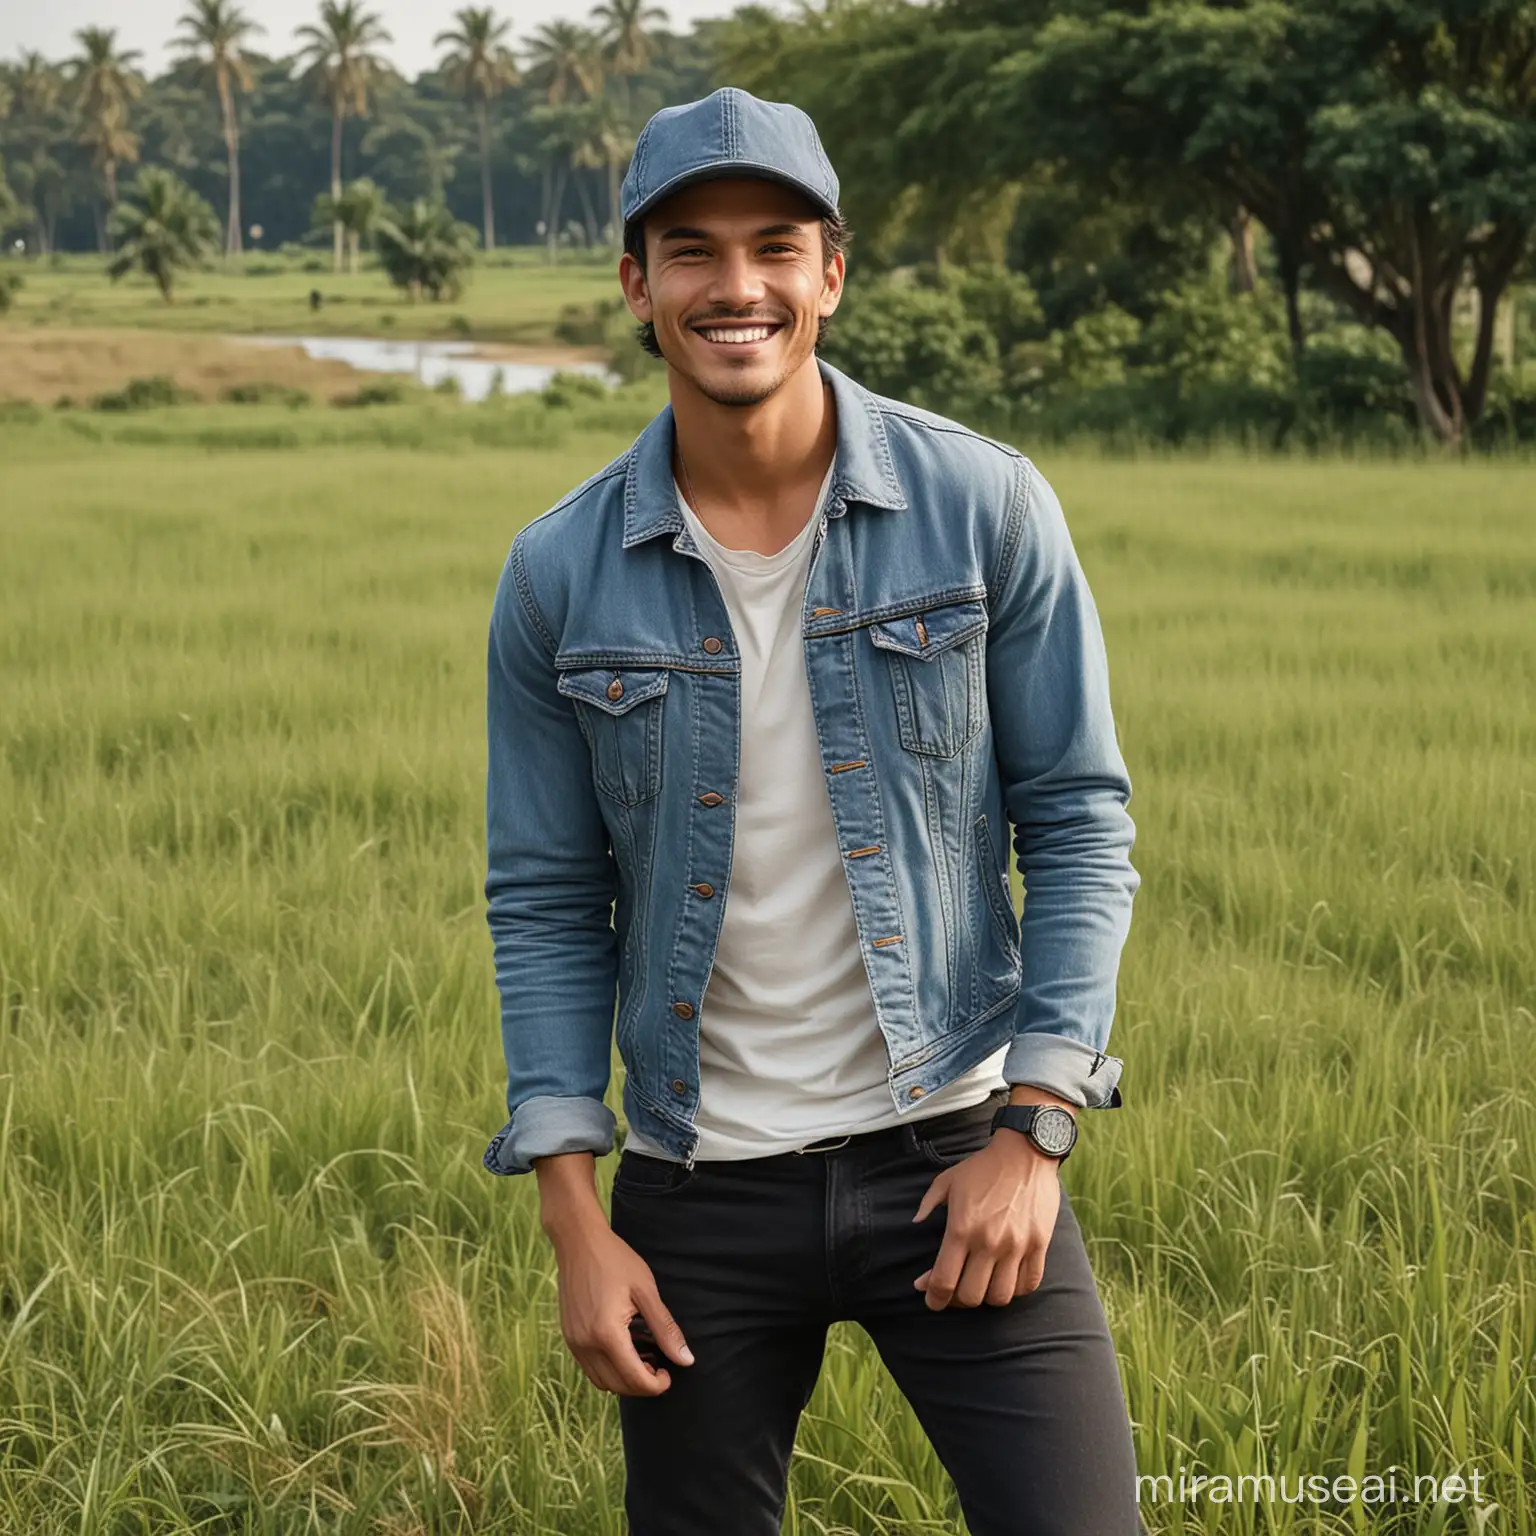 Smiling Young Man in Baseball Cap and Denim Jacket on Majapahit Era Grass Fields